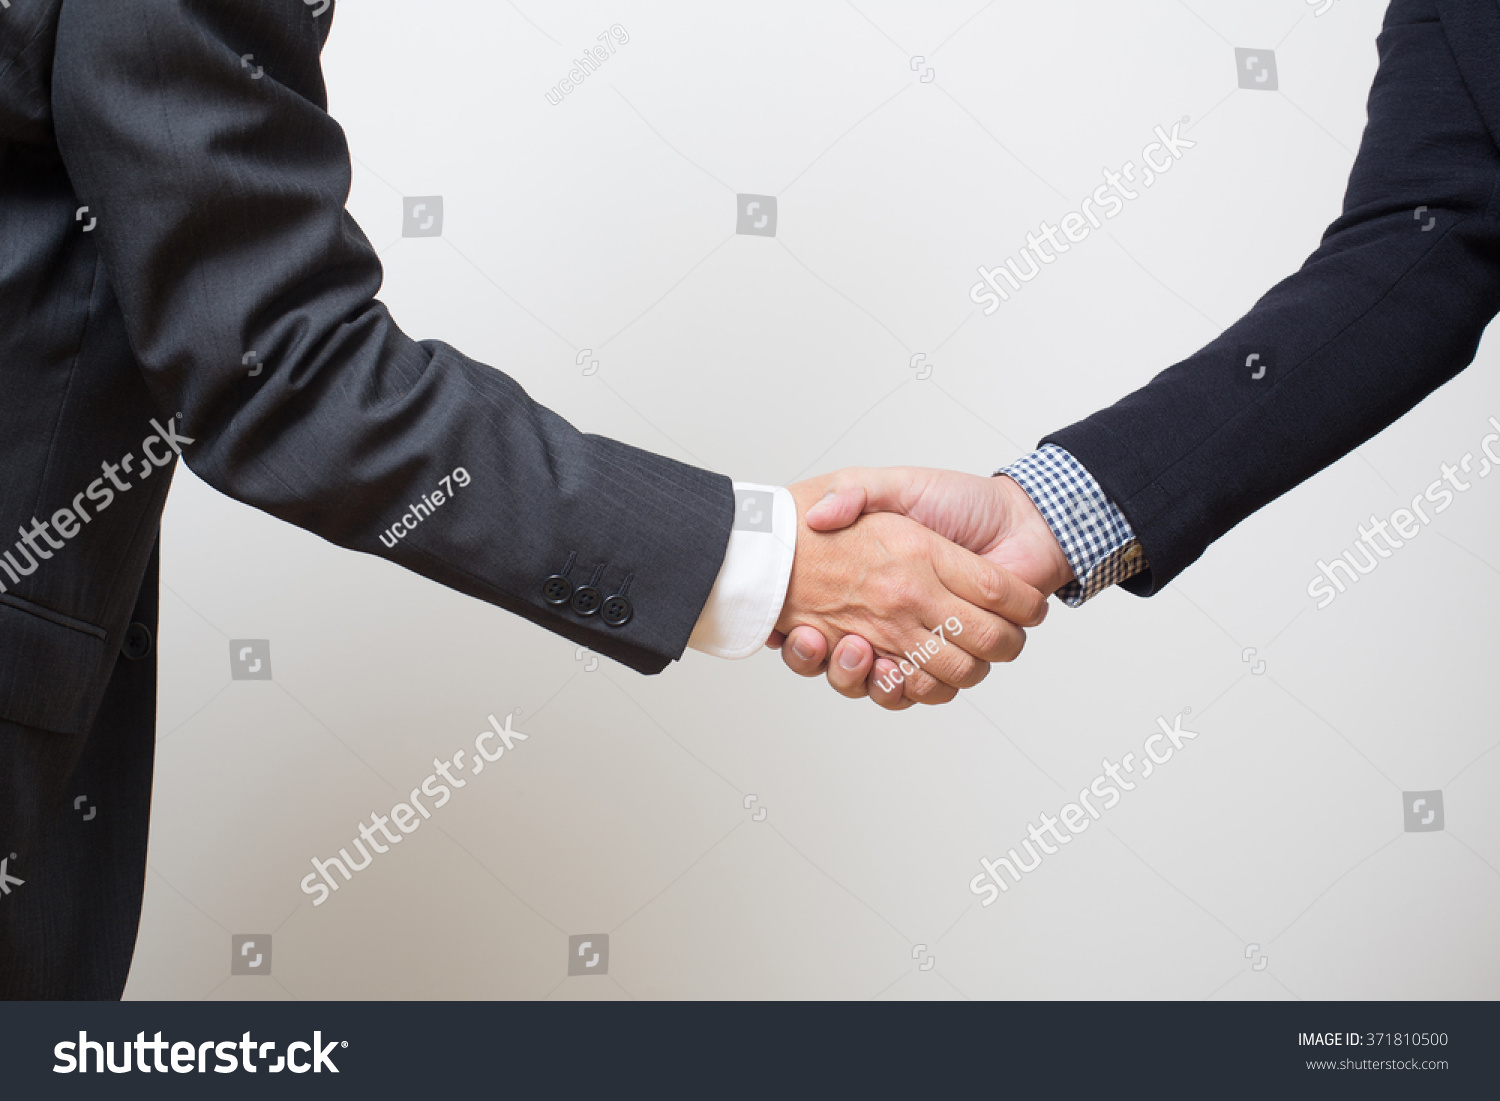 shake hand images free download